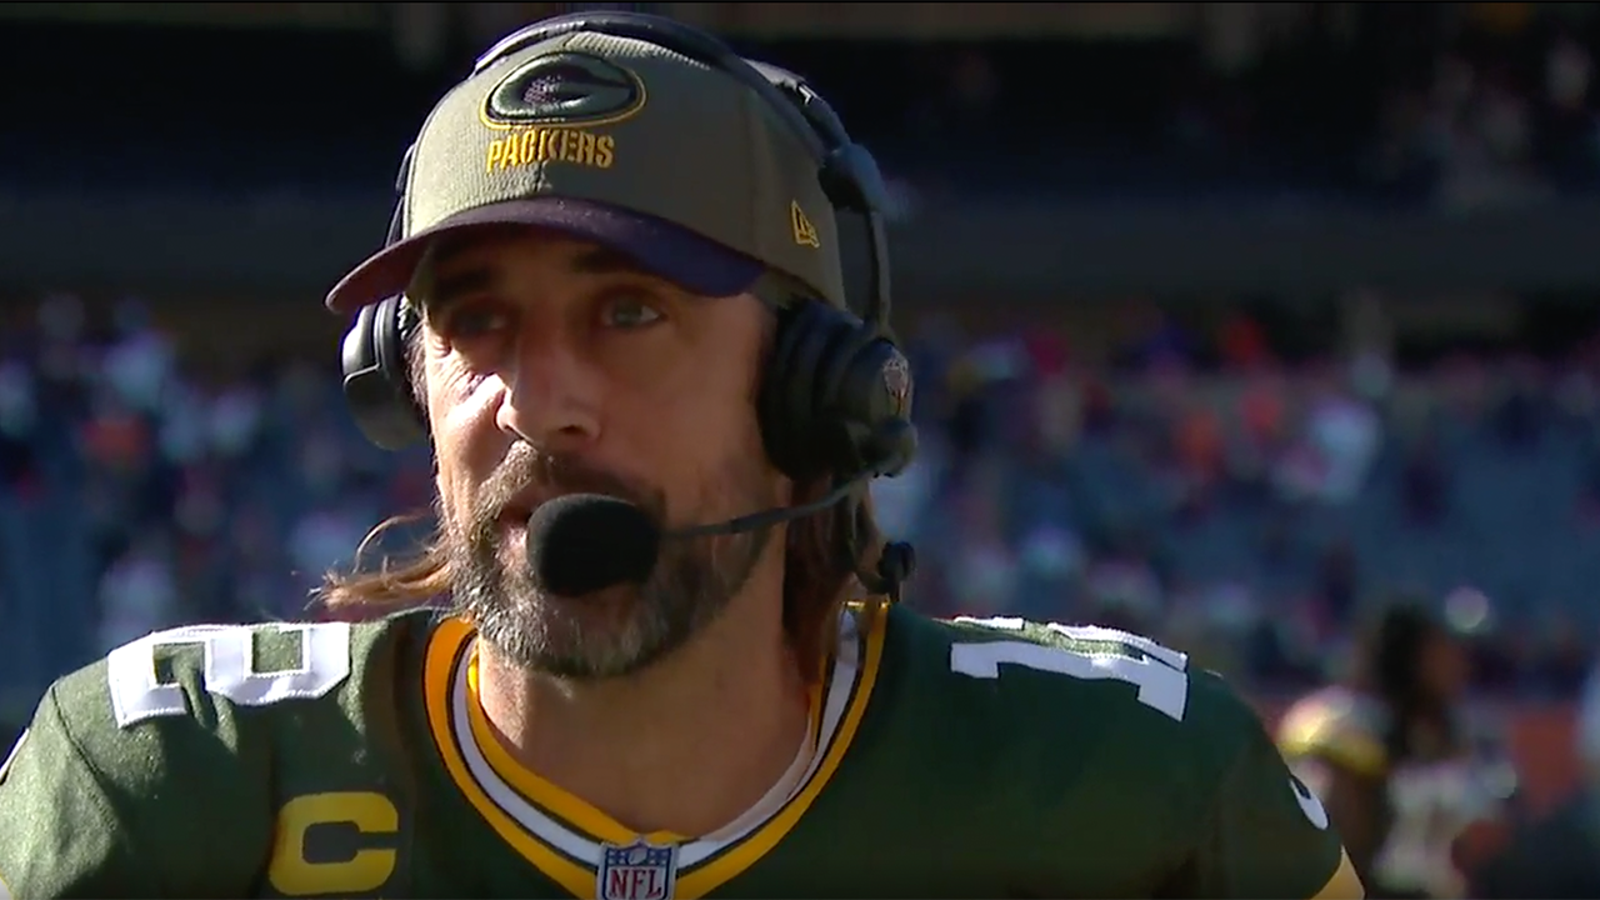 'It's always fun to beat the Bears' - Aaron Rodgers has another win in Chicago